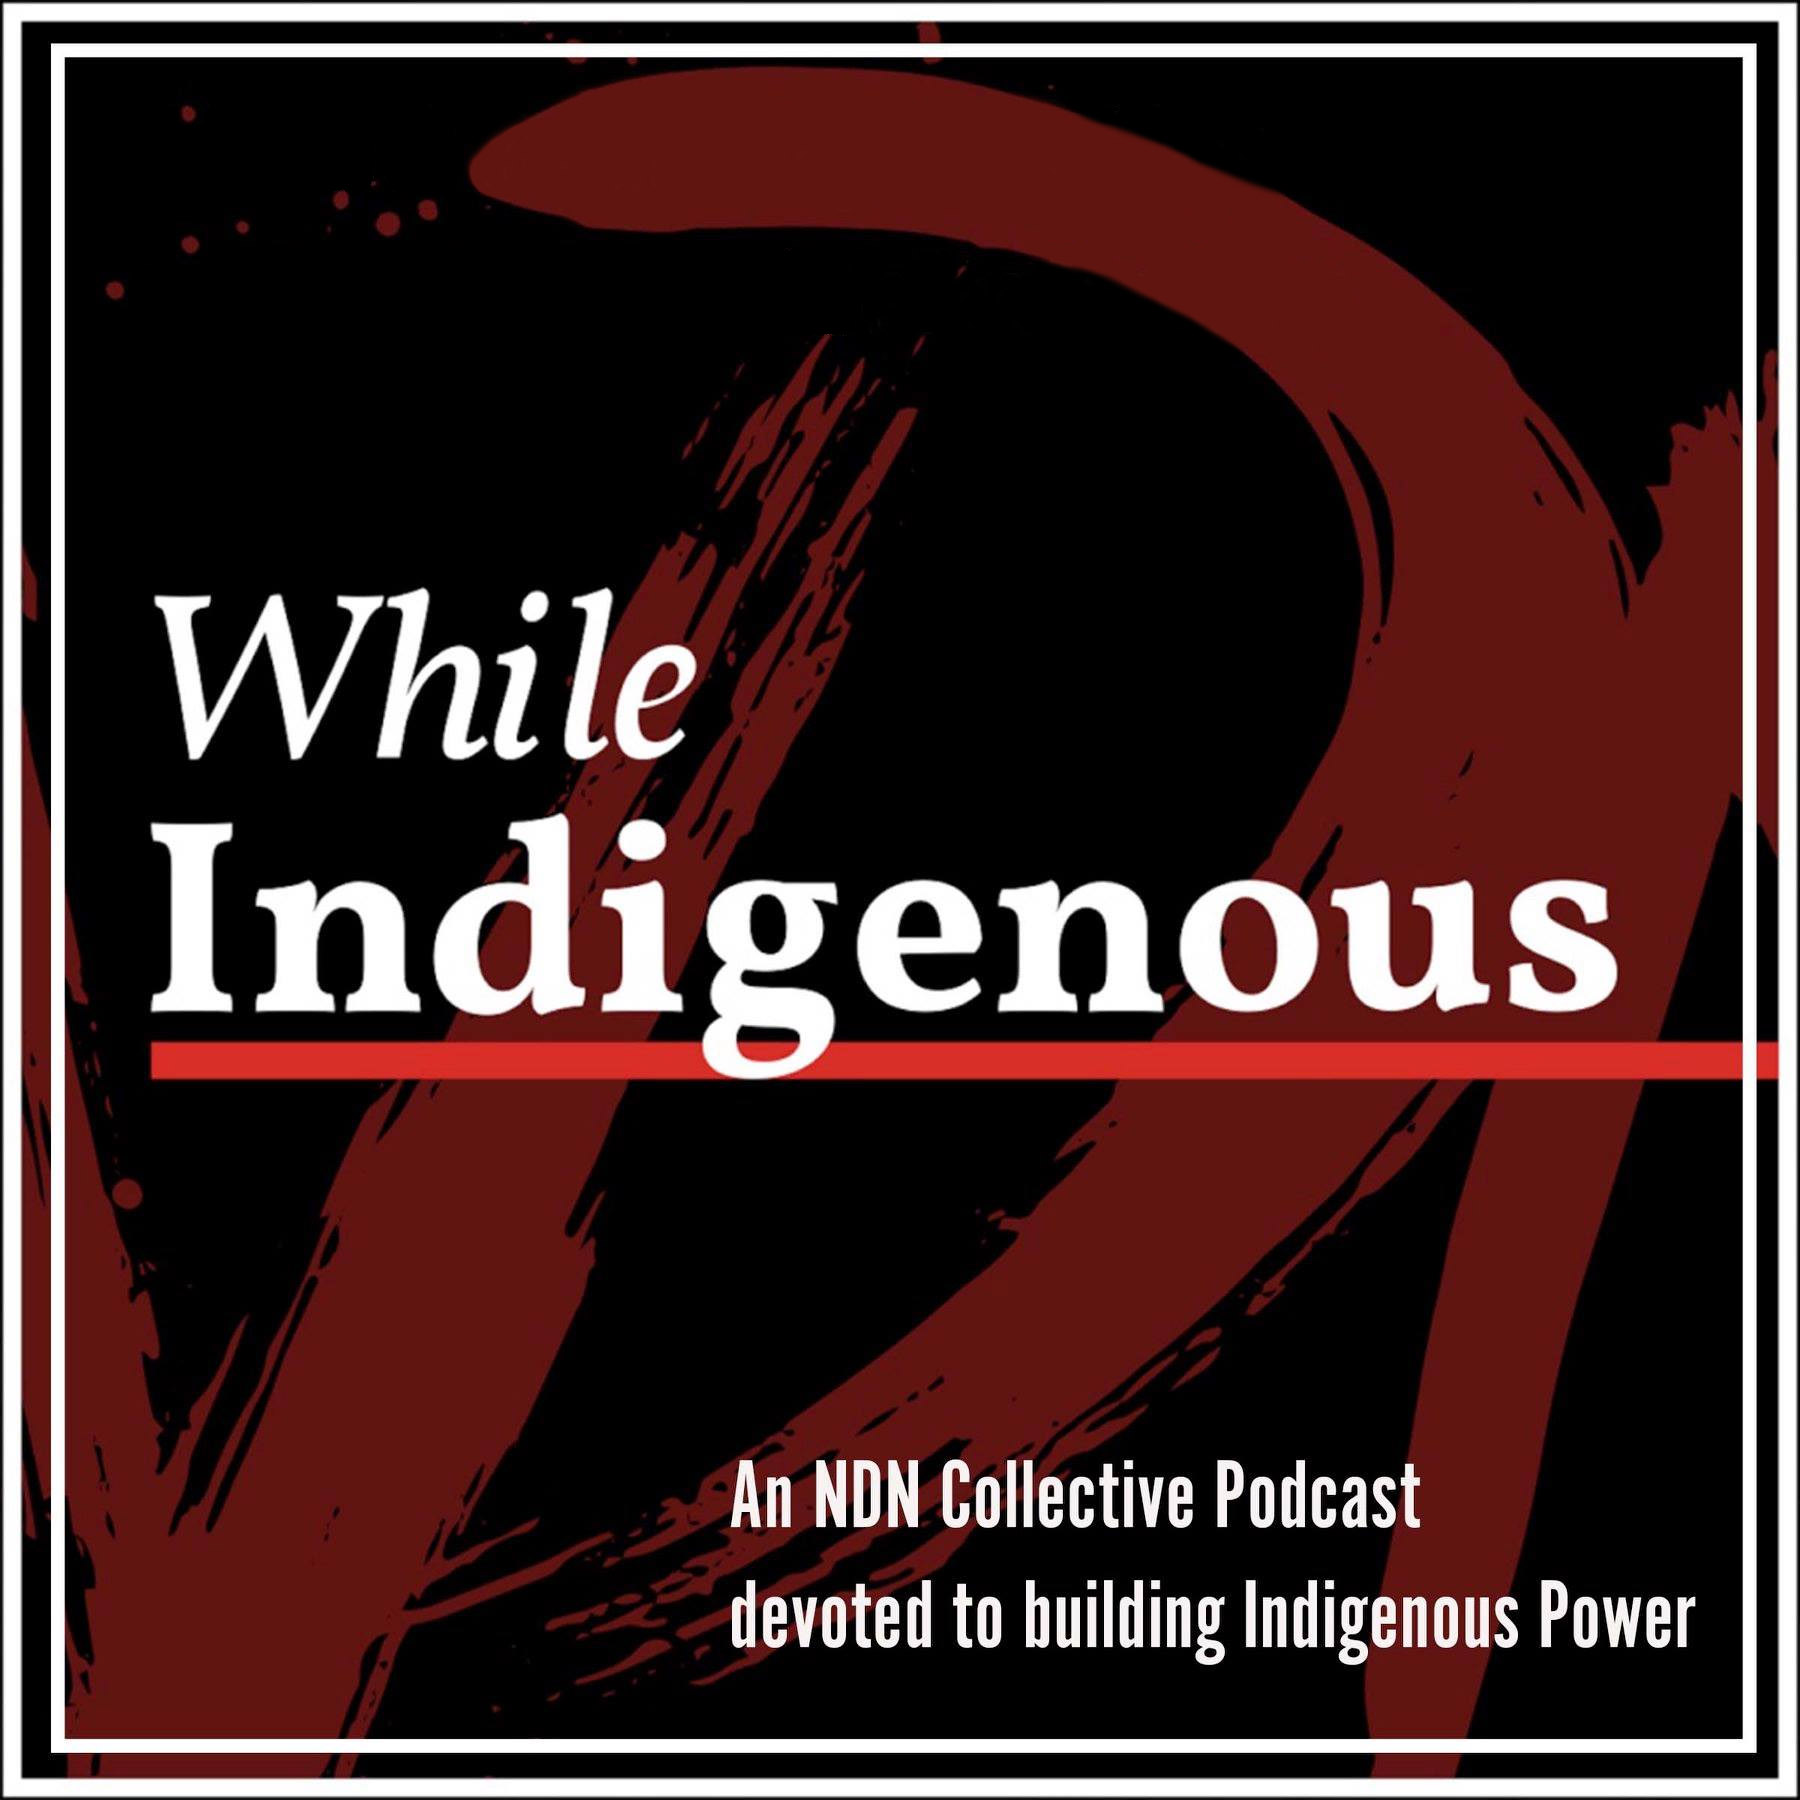 INDIGENOUS PEOPLES’ DAY AND THE RISE OF INDIGENOUS VOICES